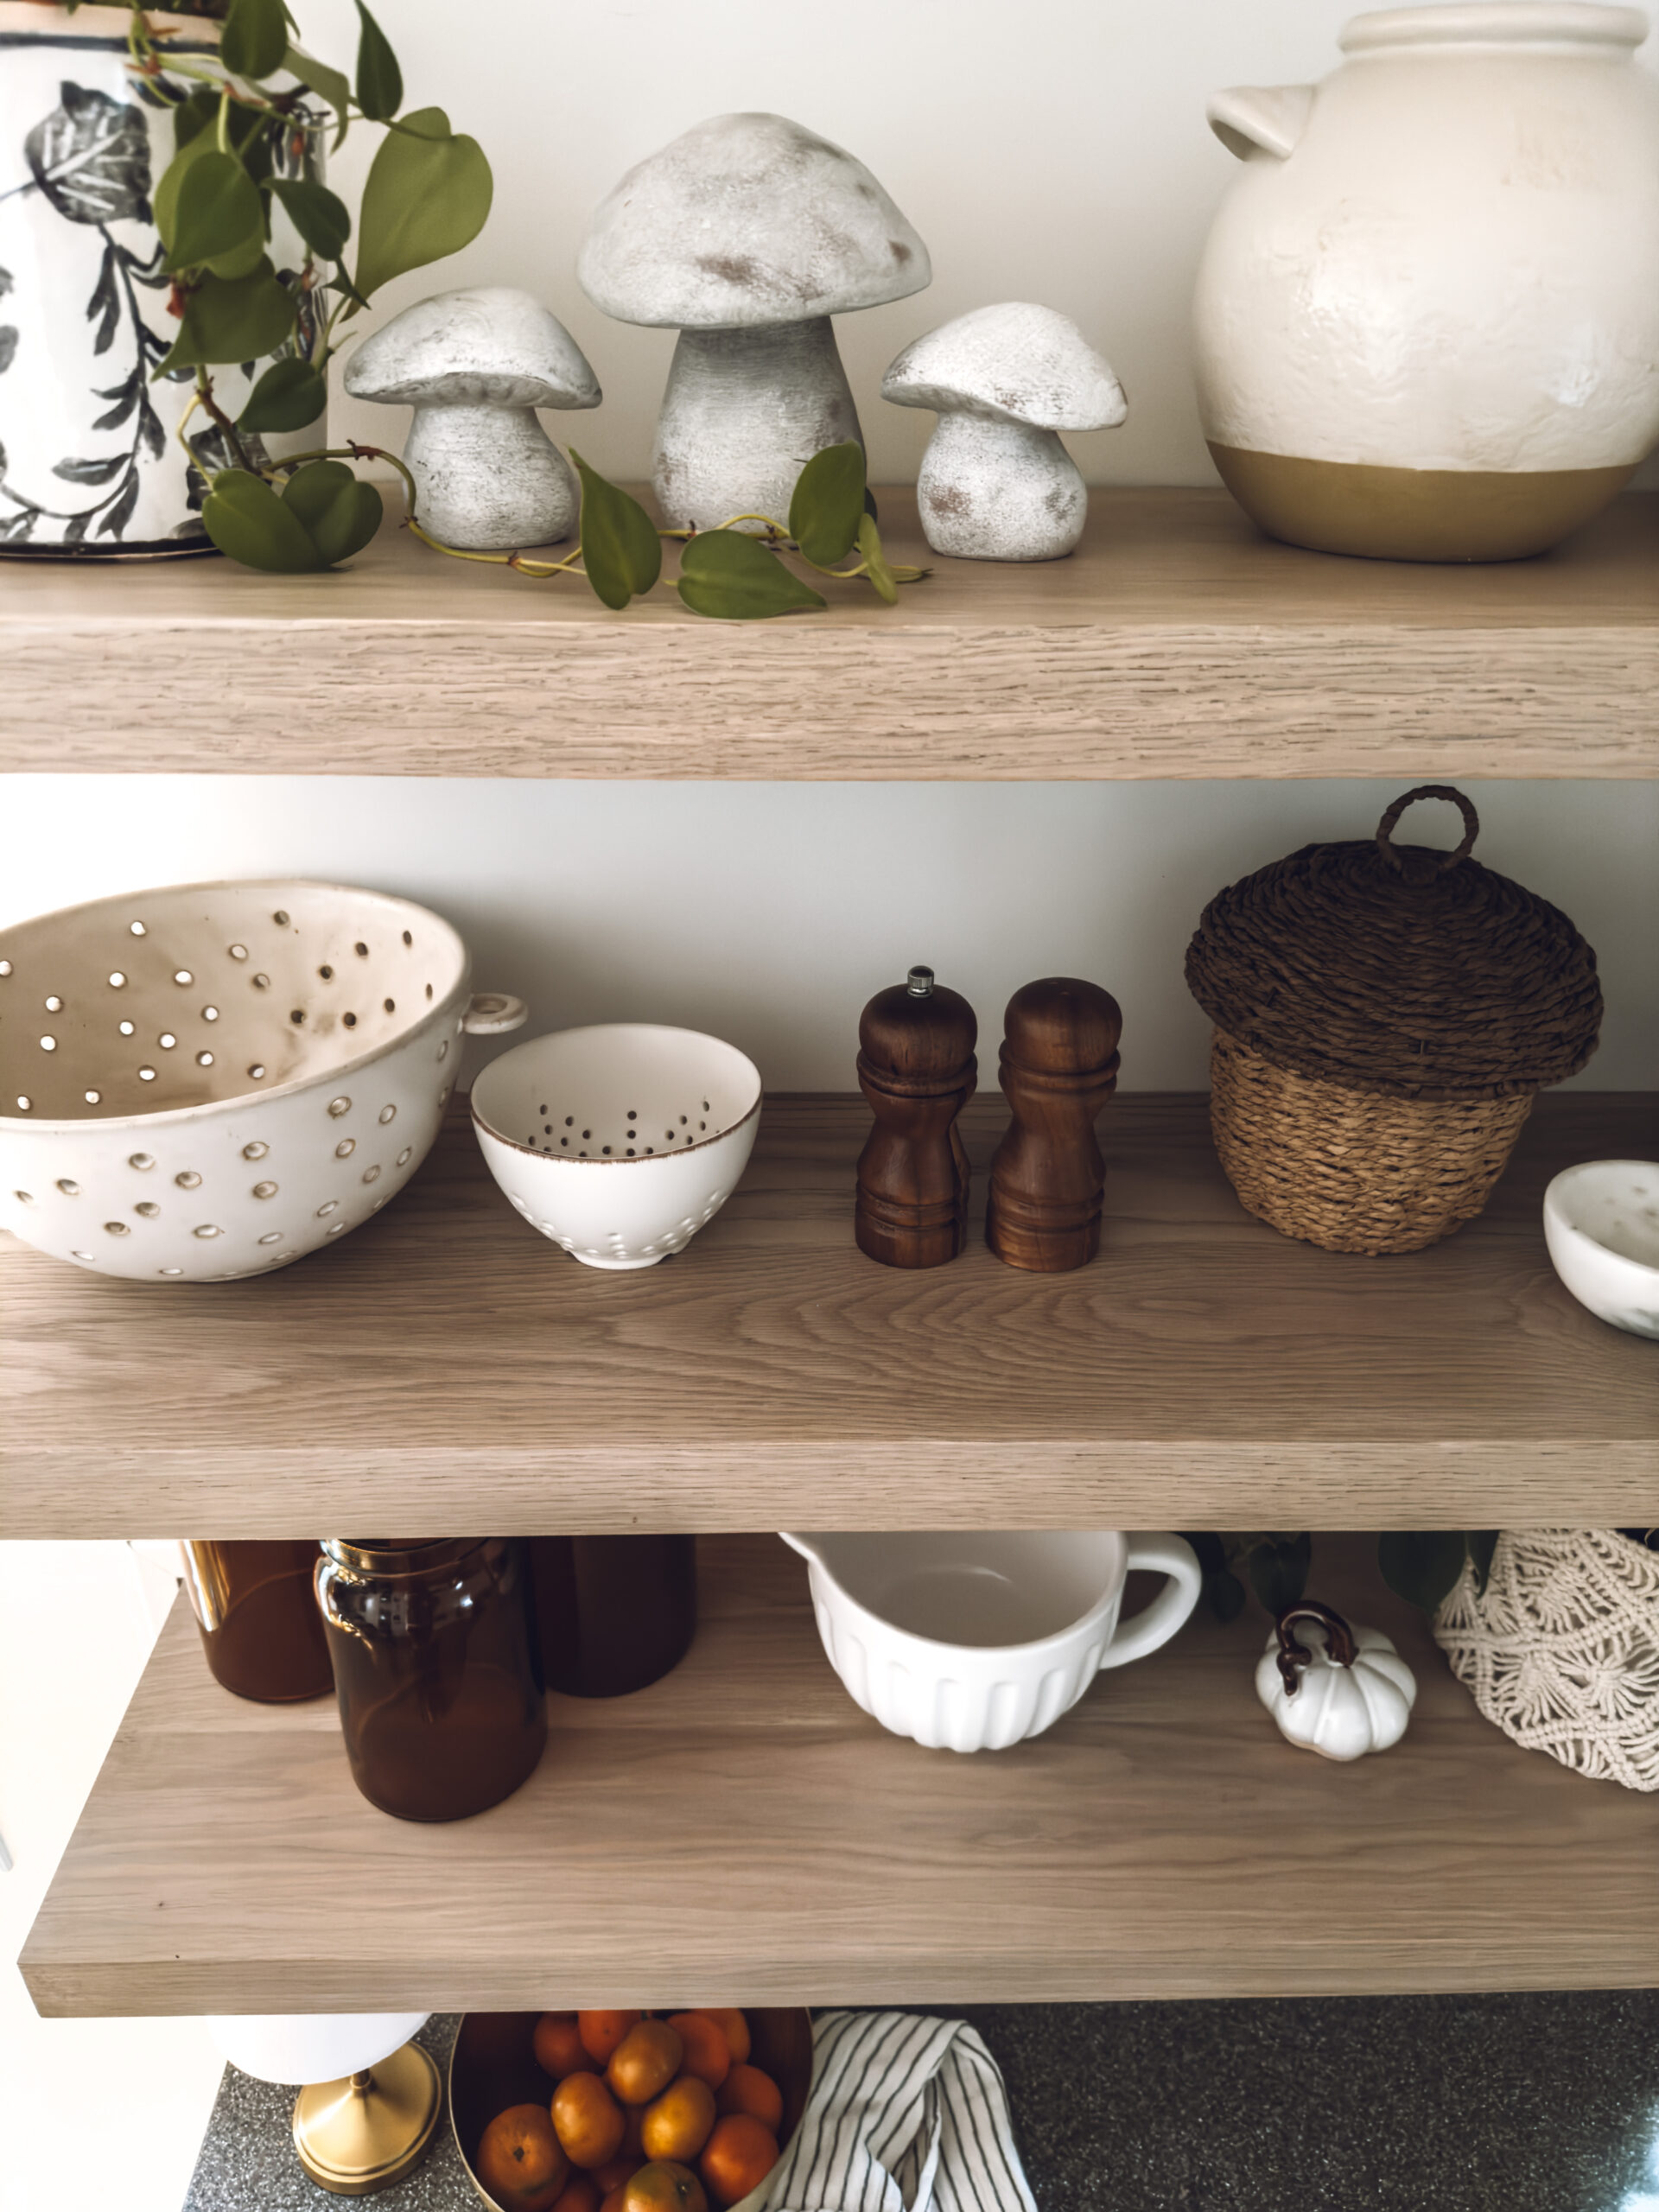 place fall mushrooms on the kitchen shelf for simple fall decor for the home